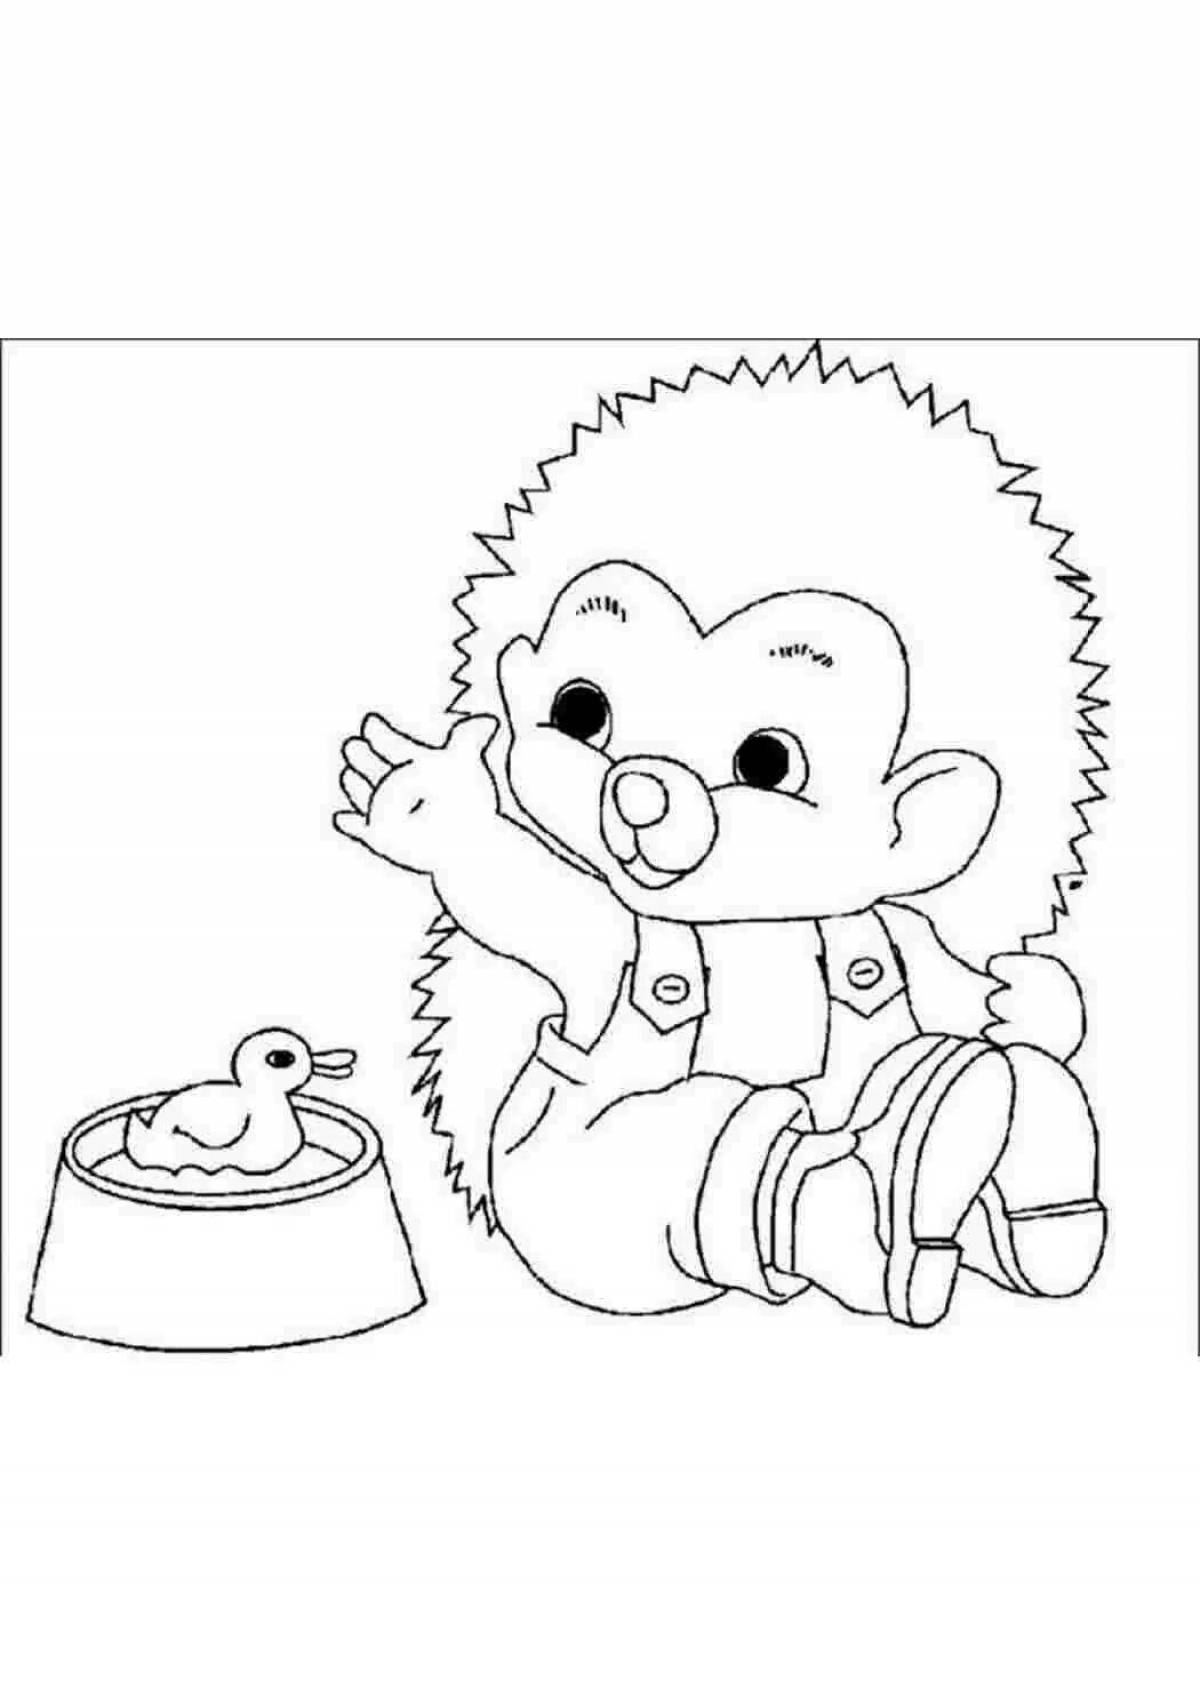 Coloring page gorgeous hedgehog